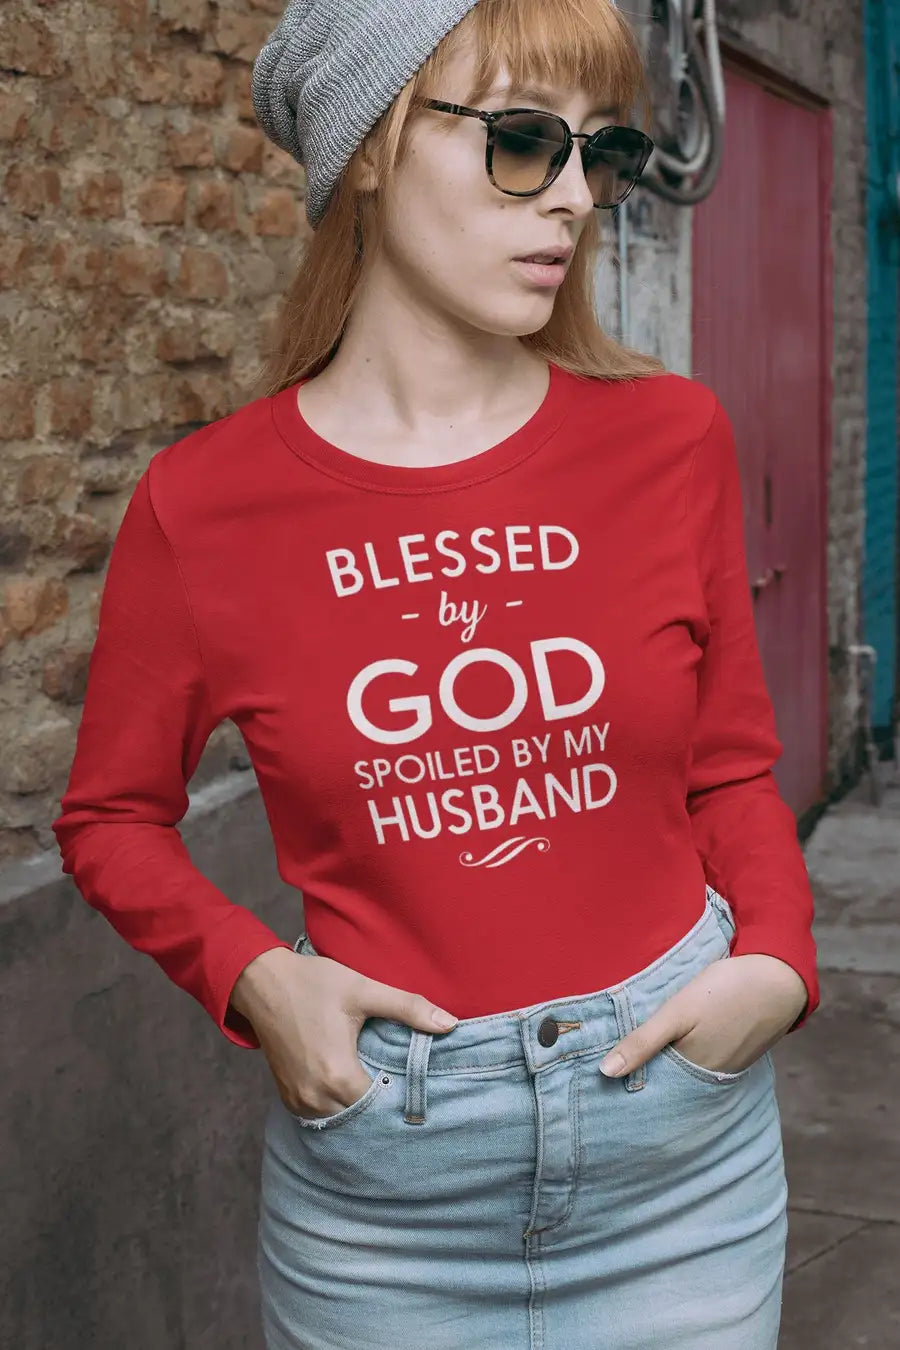 Spoiled By My Husband Exclusive Multi Colour Full Sleeves T Shirt for Married Women | Premium Design | Catch My Drift India - Catch My Drift India  black, clothing, couples, full sleeves, lon